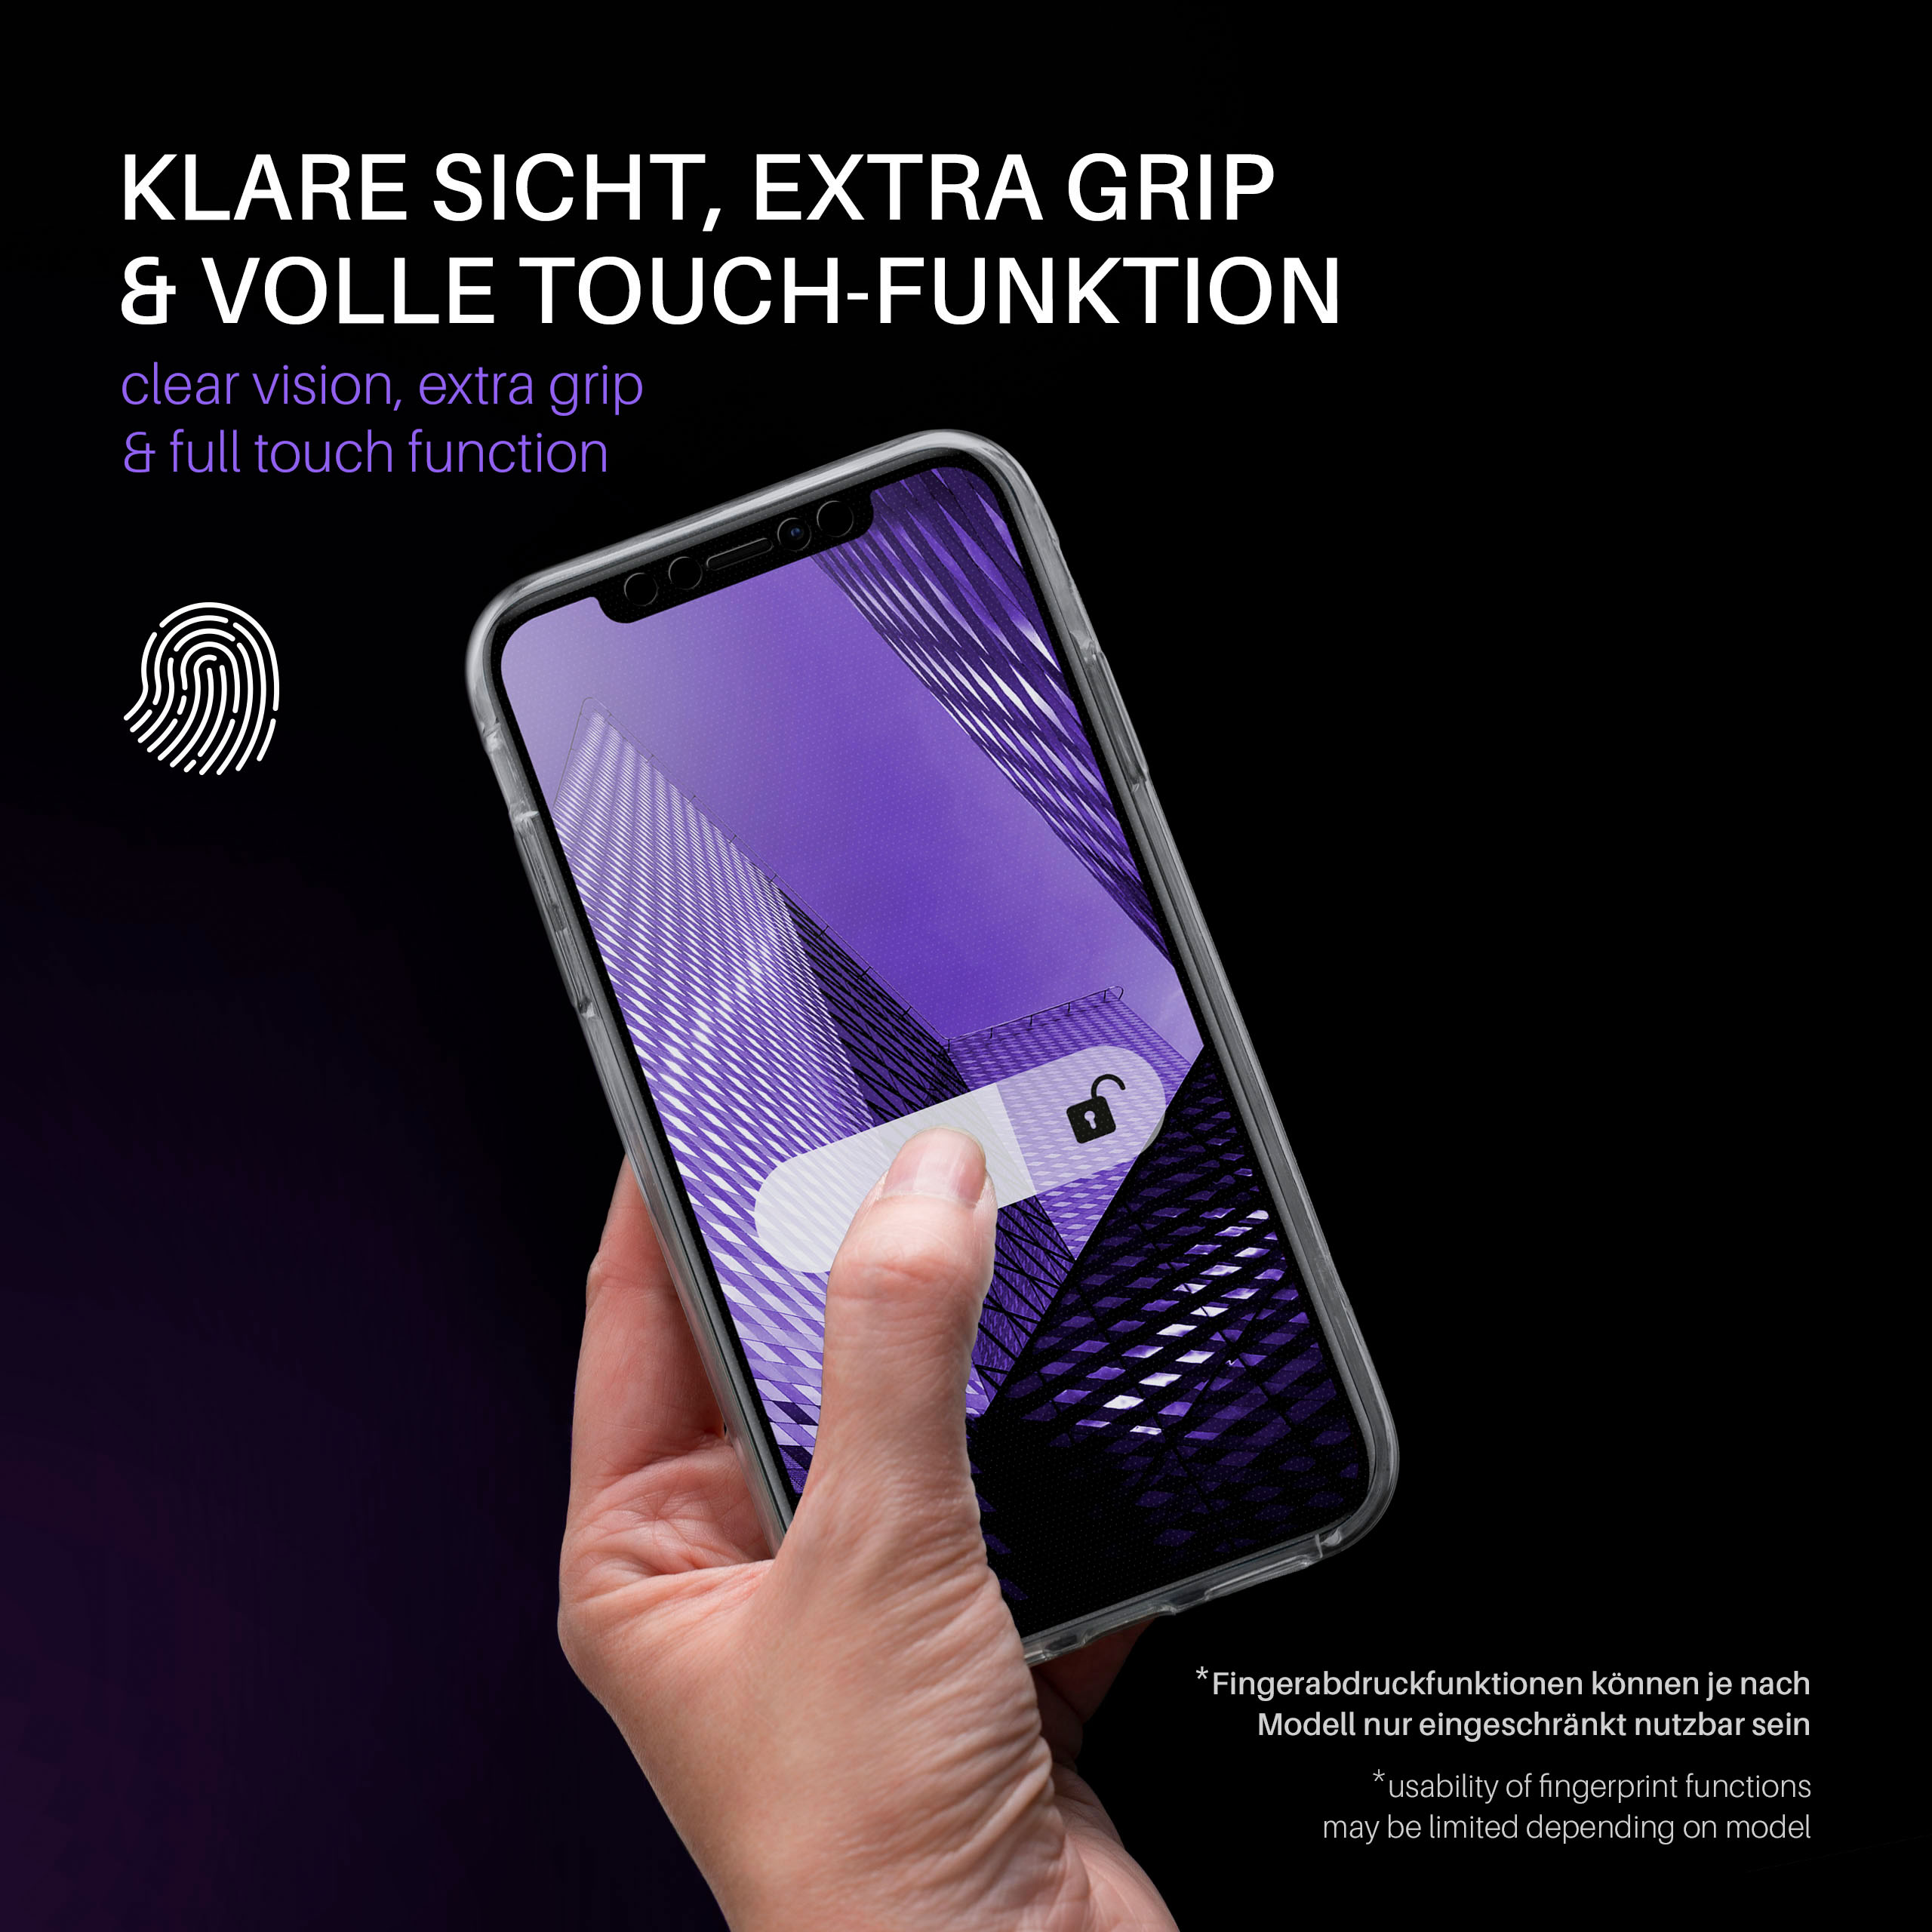 Galaxy Double Case, / Neo, Samsung, MOEX S3 Full Cover, Anthracite S3